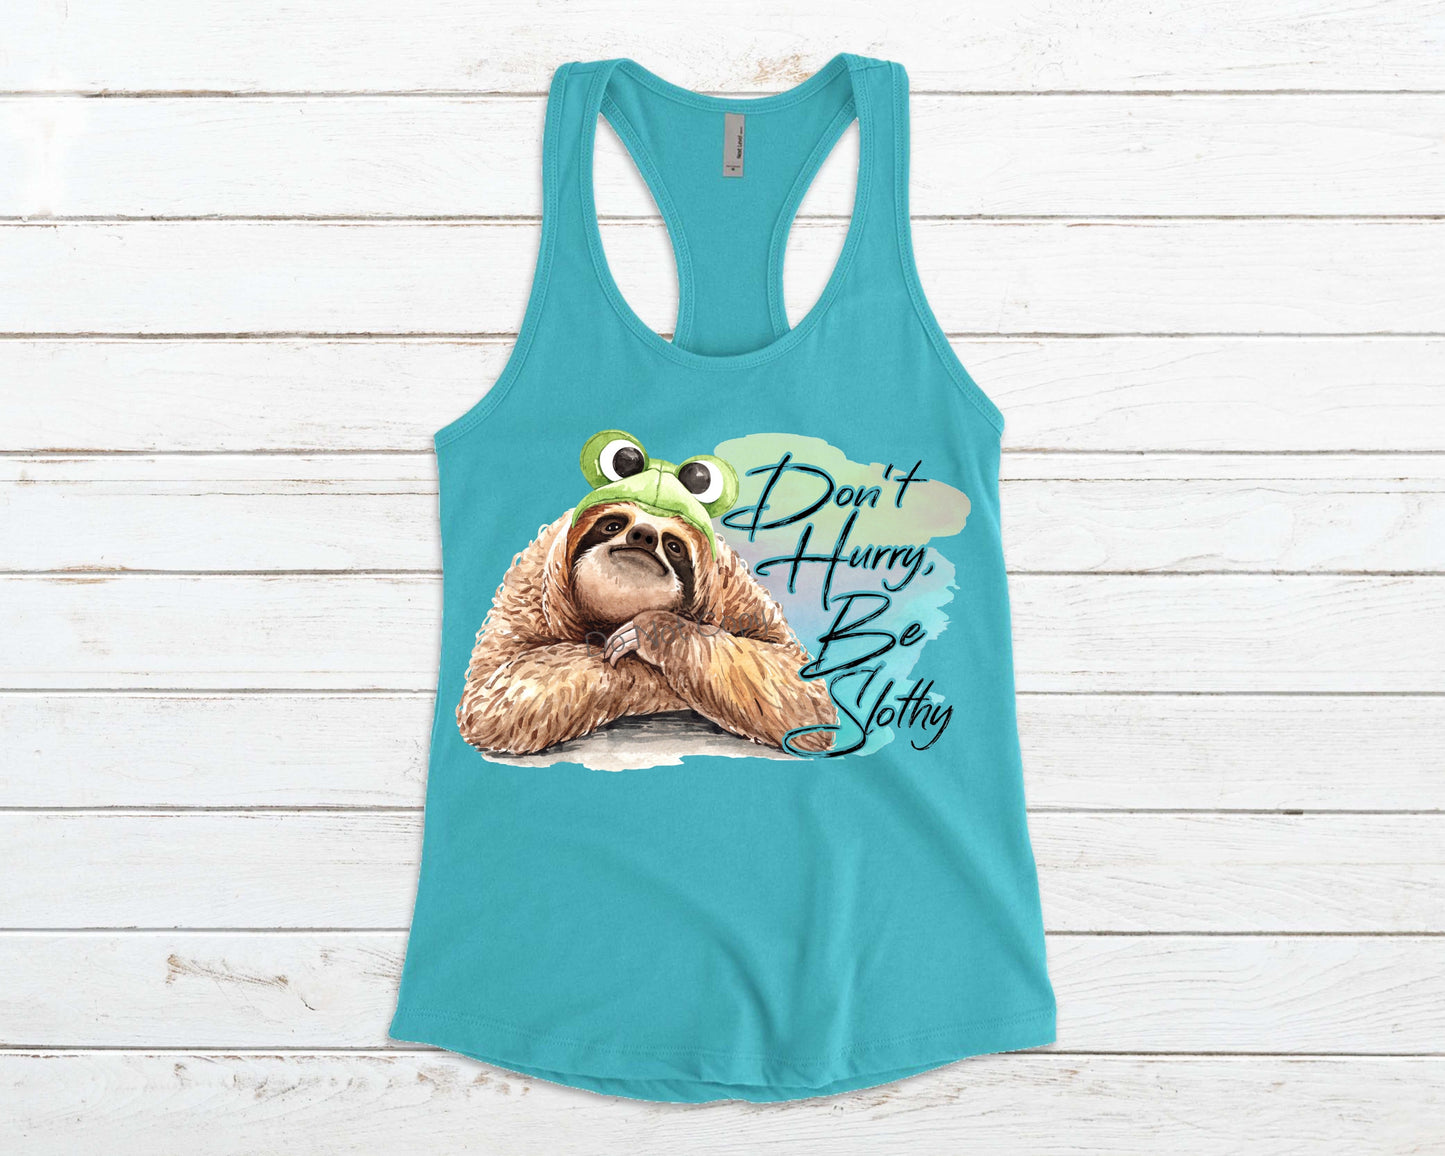 Don’t worry be slothy - DTF